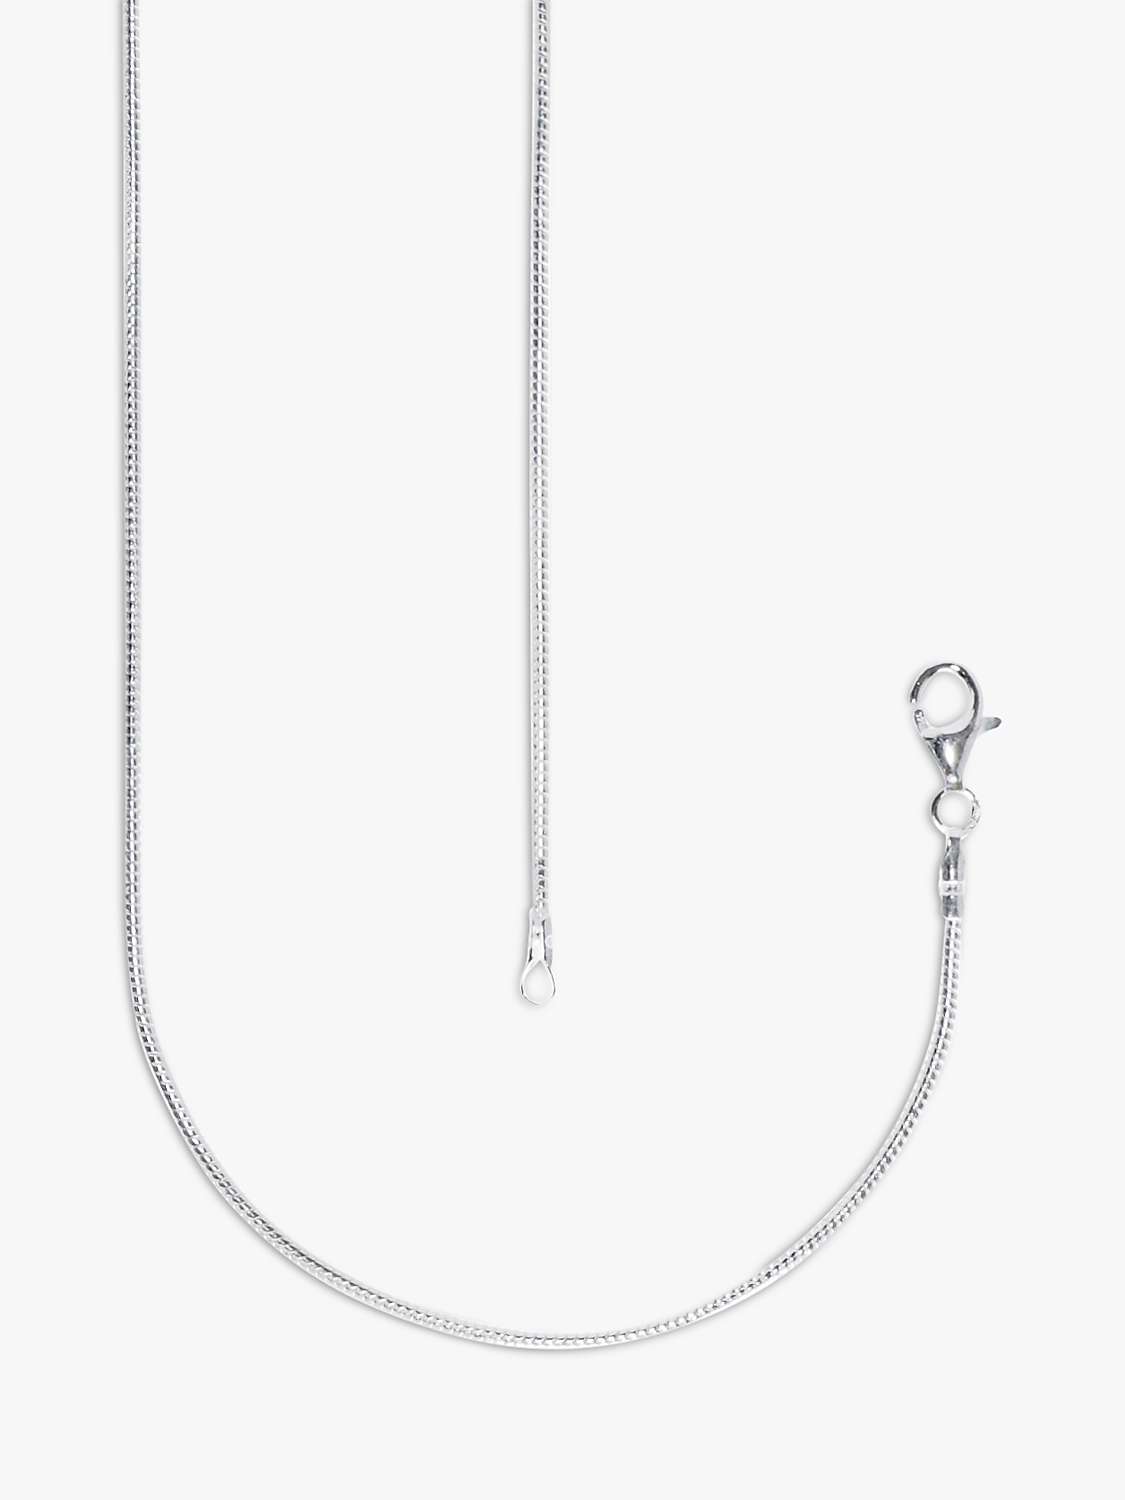 Buy Nina B Unisex Snake Chain Necklace, Silver Online at johnlewis.com